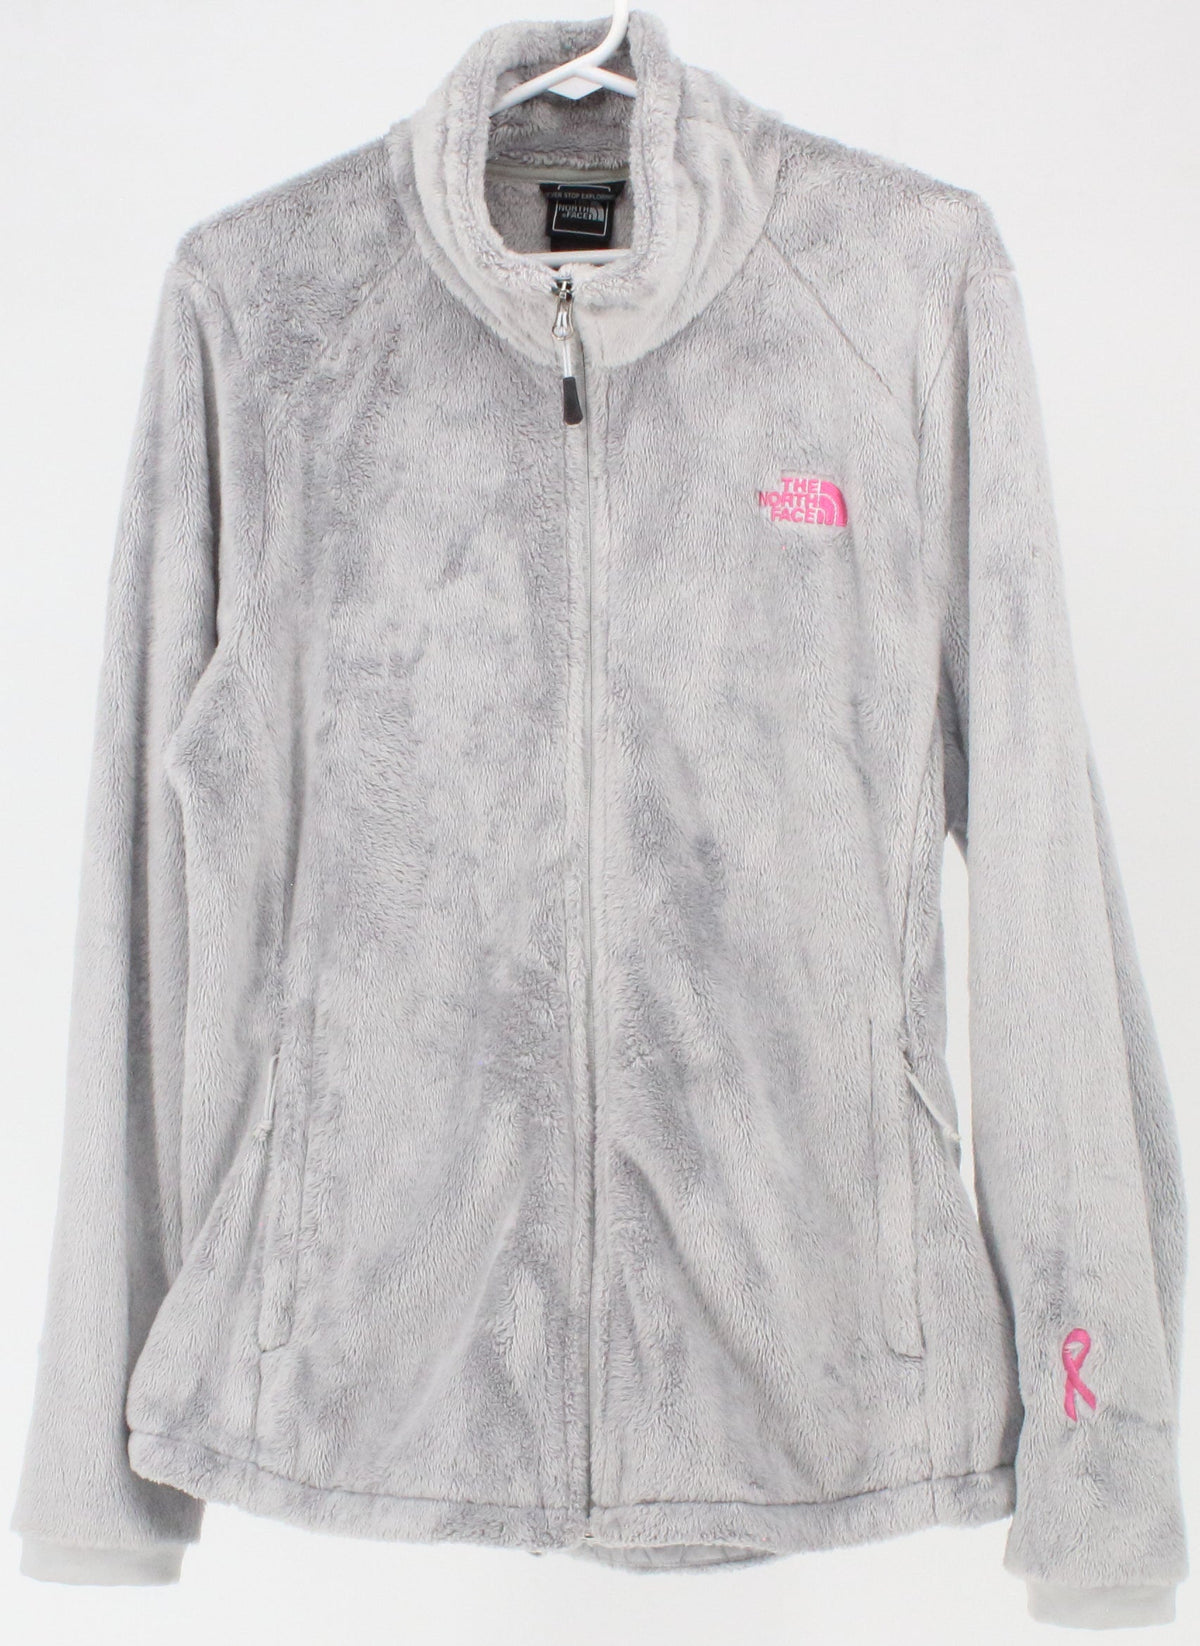 The North Face Grey Women's Fleece With Pink Logo